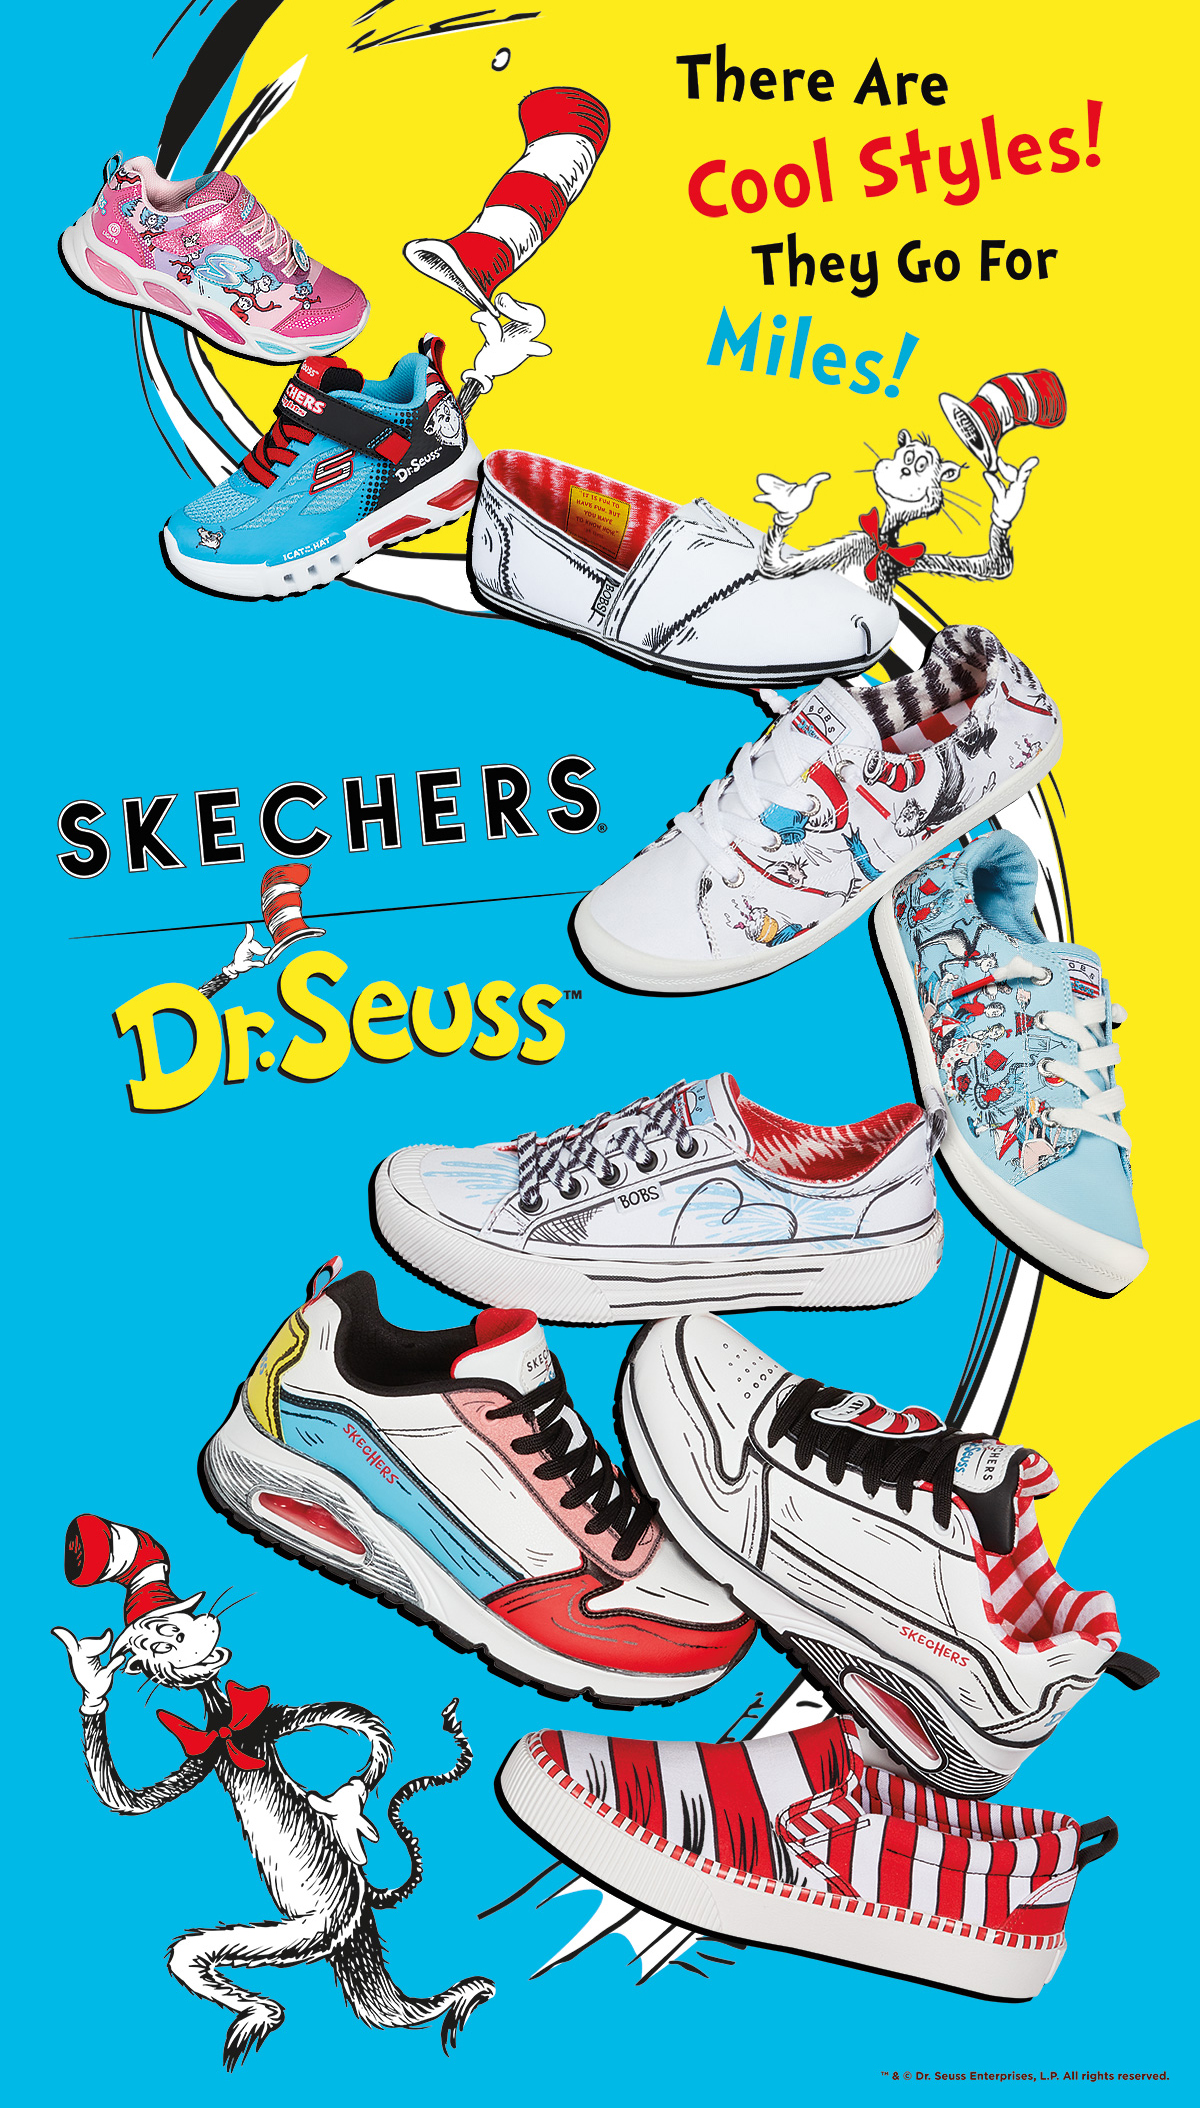 OMG HEY HSHDHDH by Bluxdoodle on Sketchers United